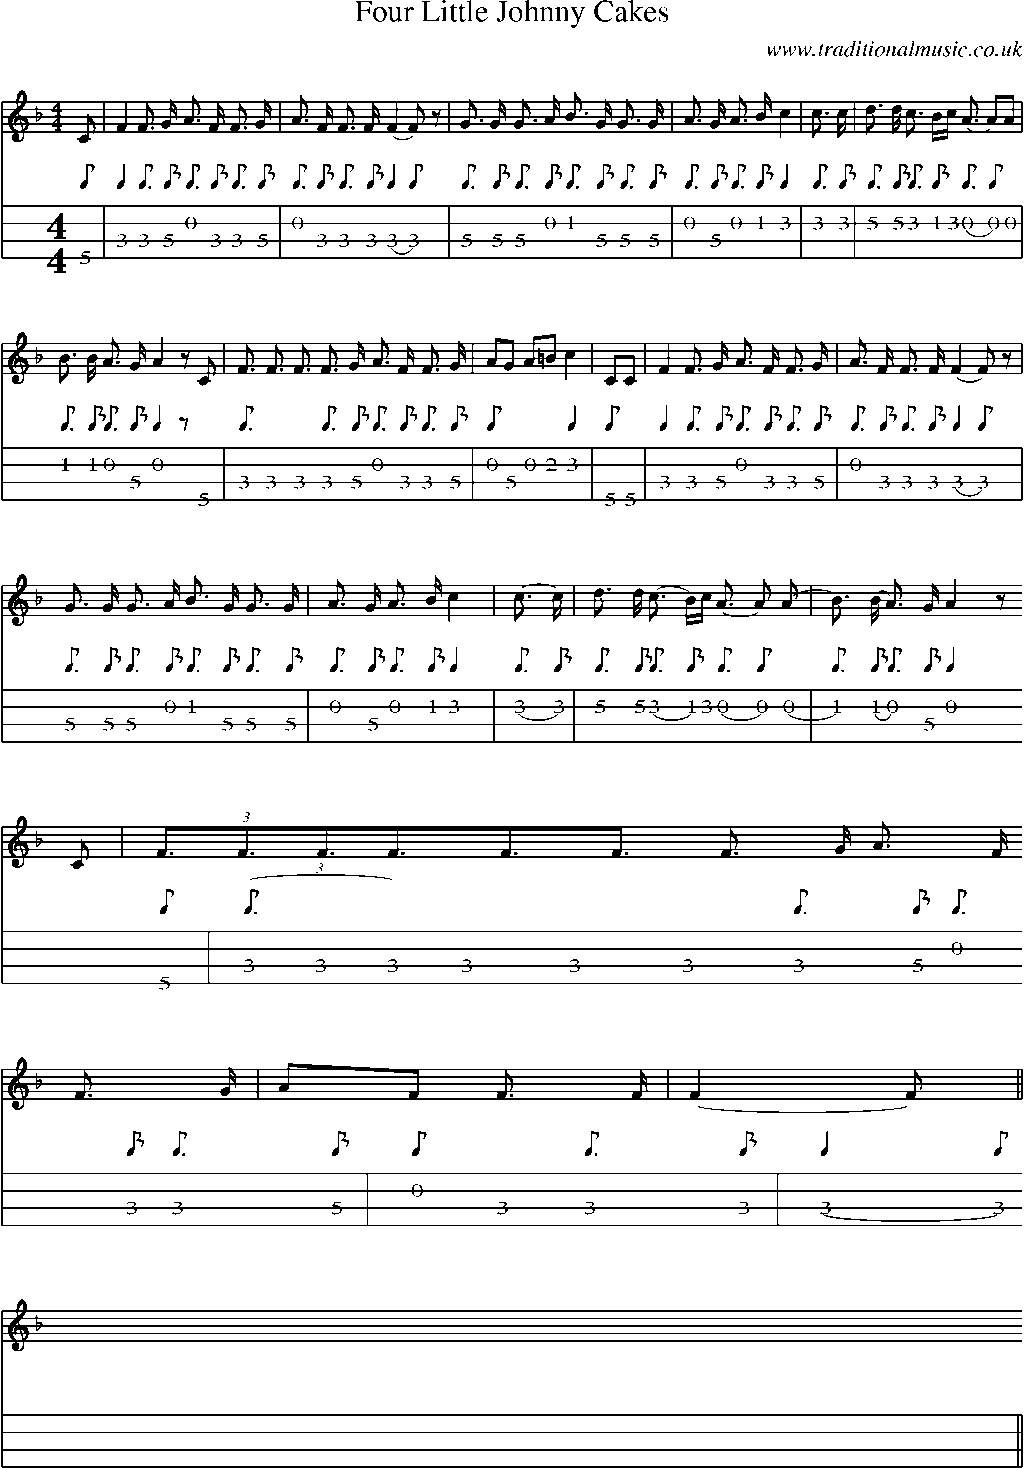 Mandolin Tab and Sheet Music for Four Little Johnny Cakes